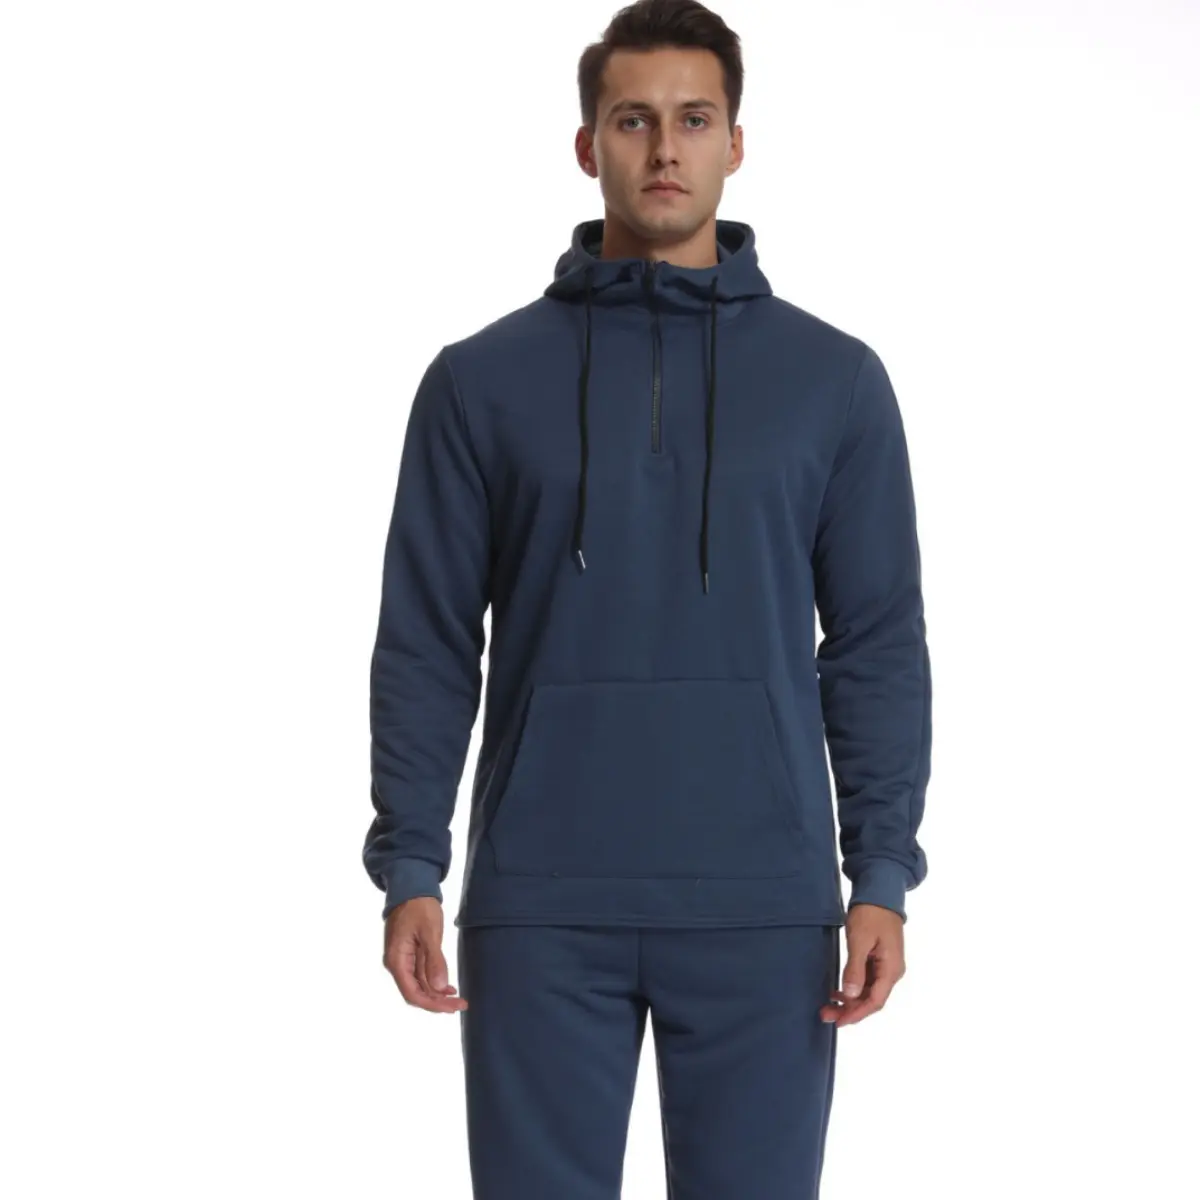 Latest Design Outdoor Training Top Wear 1/4 Zip Hooded Top Jogging Men Training Suits Breathable Fitness Leisure Jogging Wear